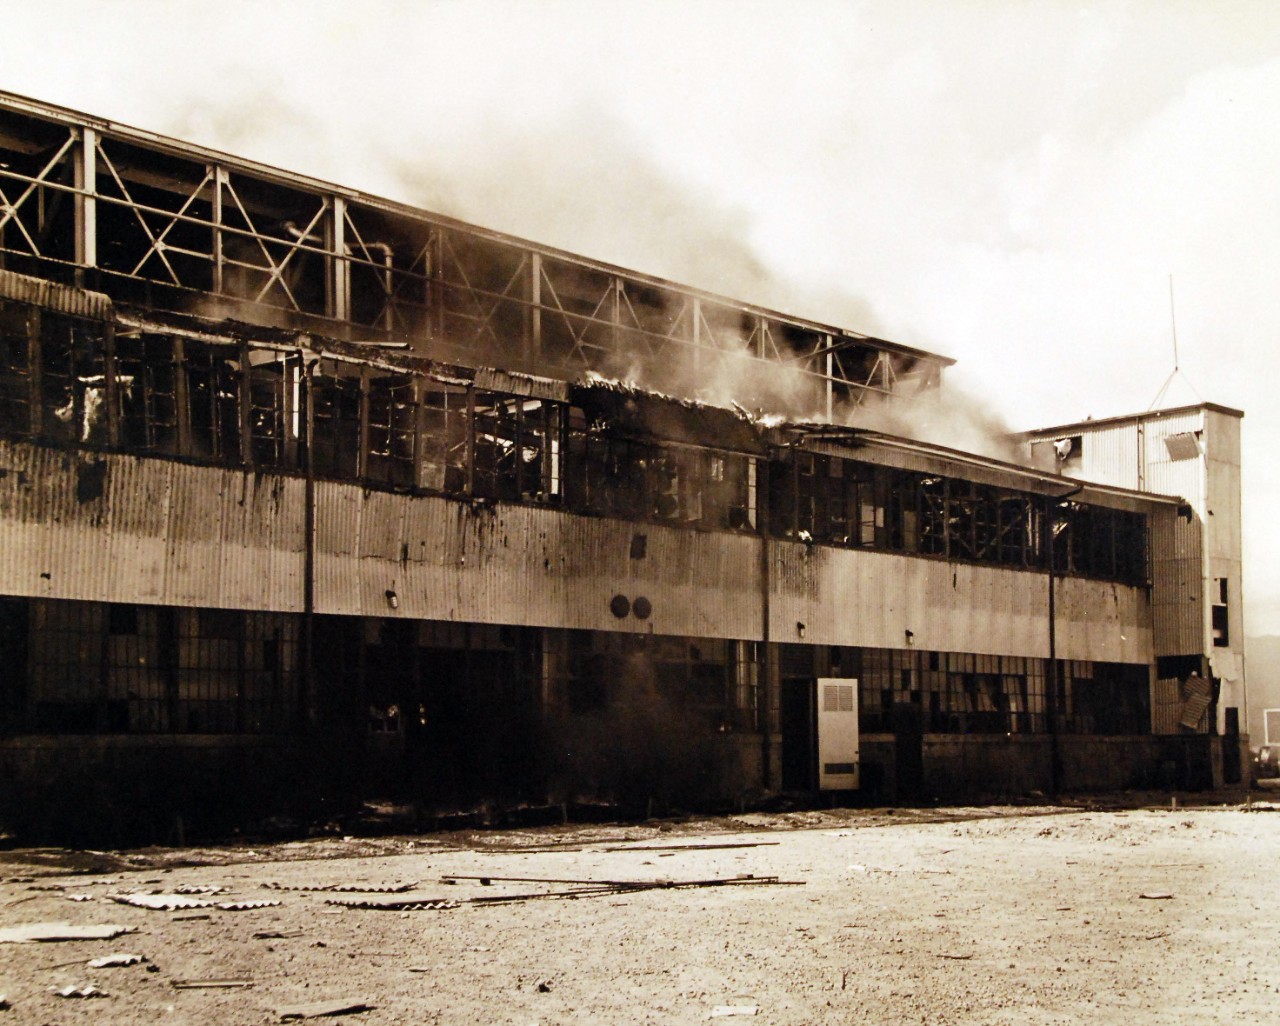 80-G-77651:   Japanese Attack on Pearl Harbor Attack, 7 December 1941.  Smoldering U.S. Navy Hangar at Naval Air Station, Kaneohe Bay, Oahu, after the Japanese attack.  U.S. Navy photograph, now in the collections of the National Archives. (3/4/2015).